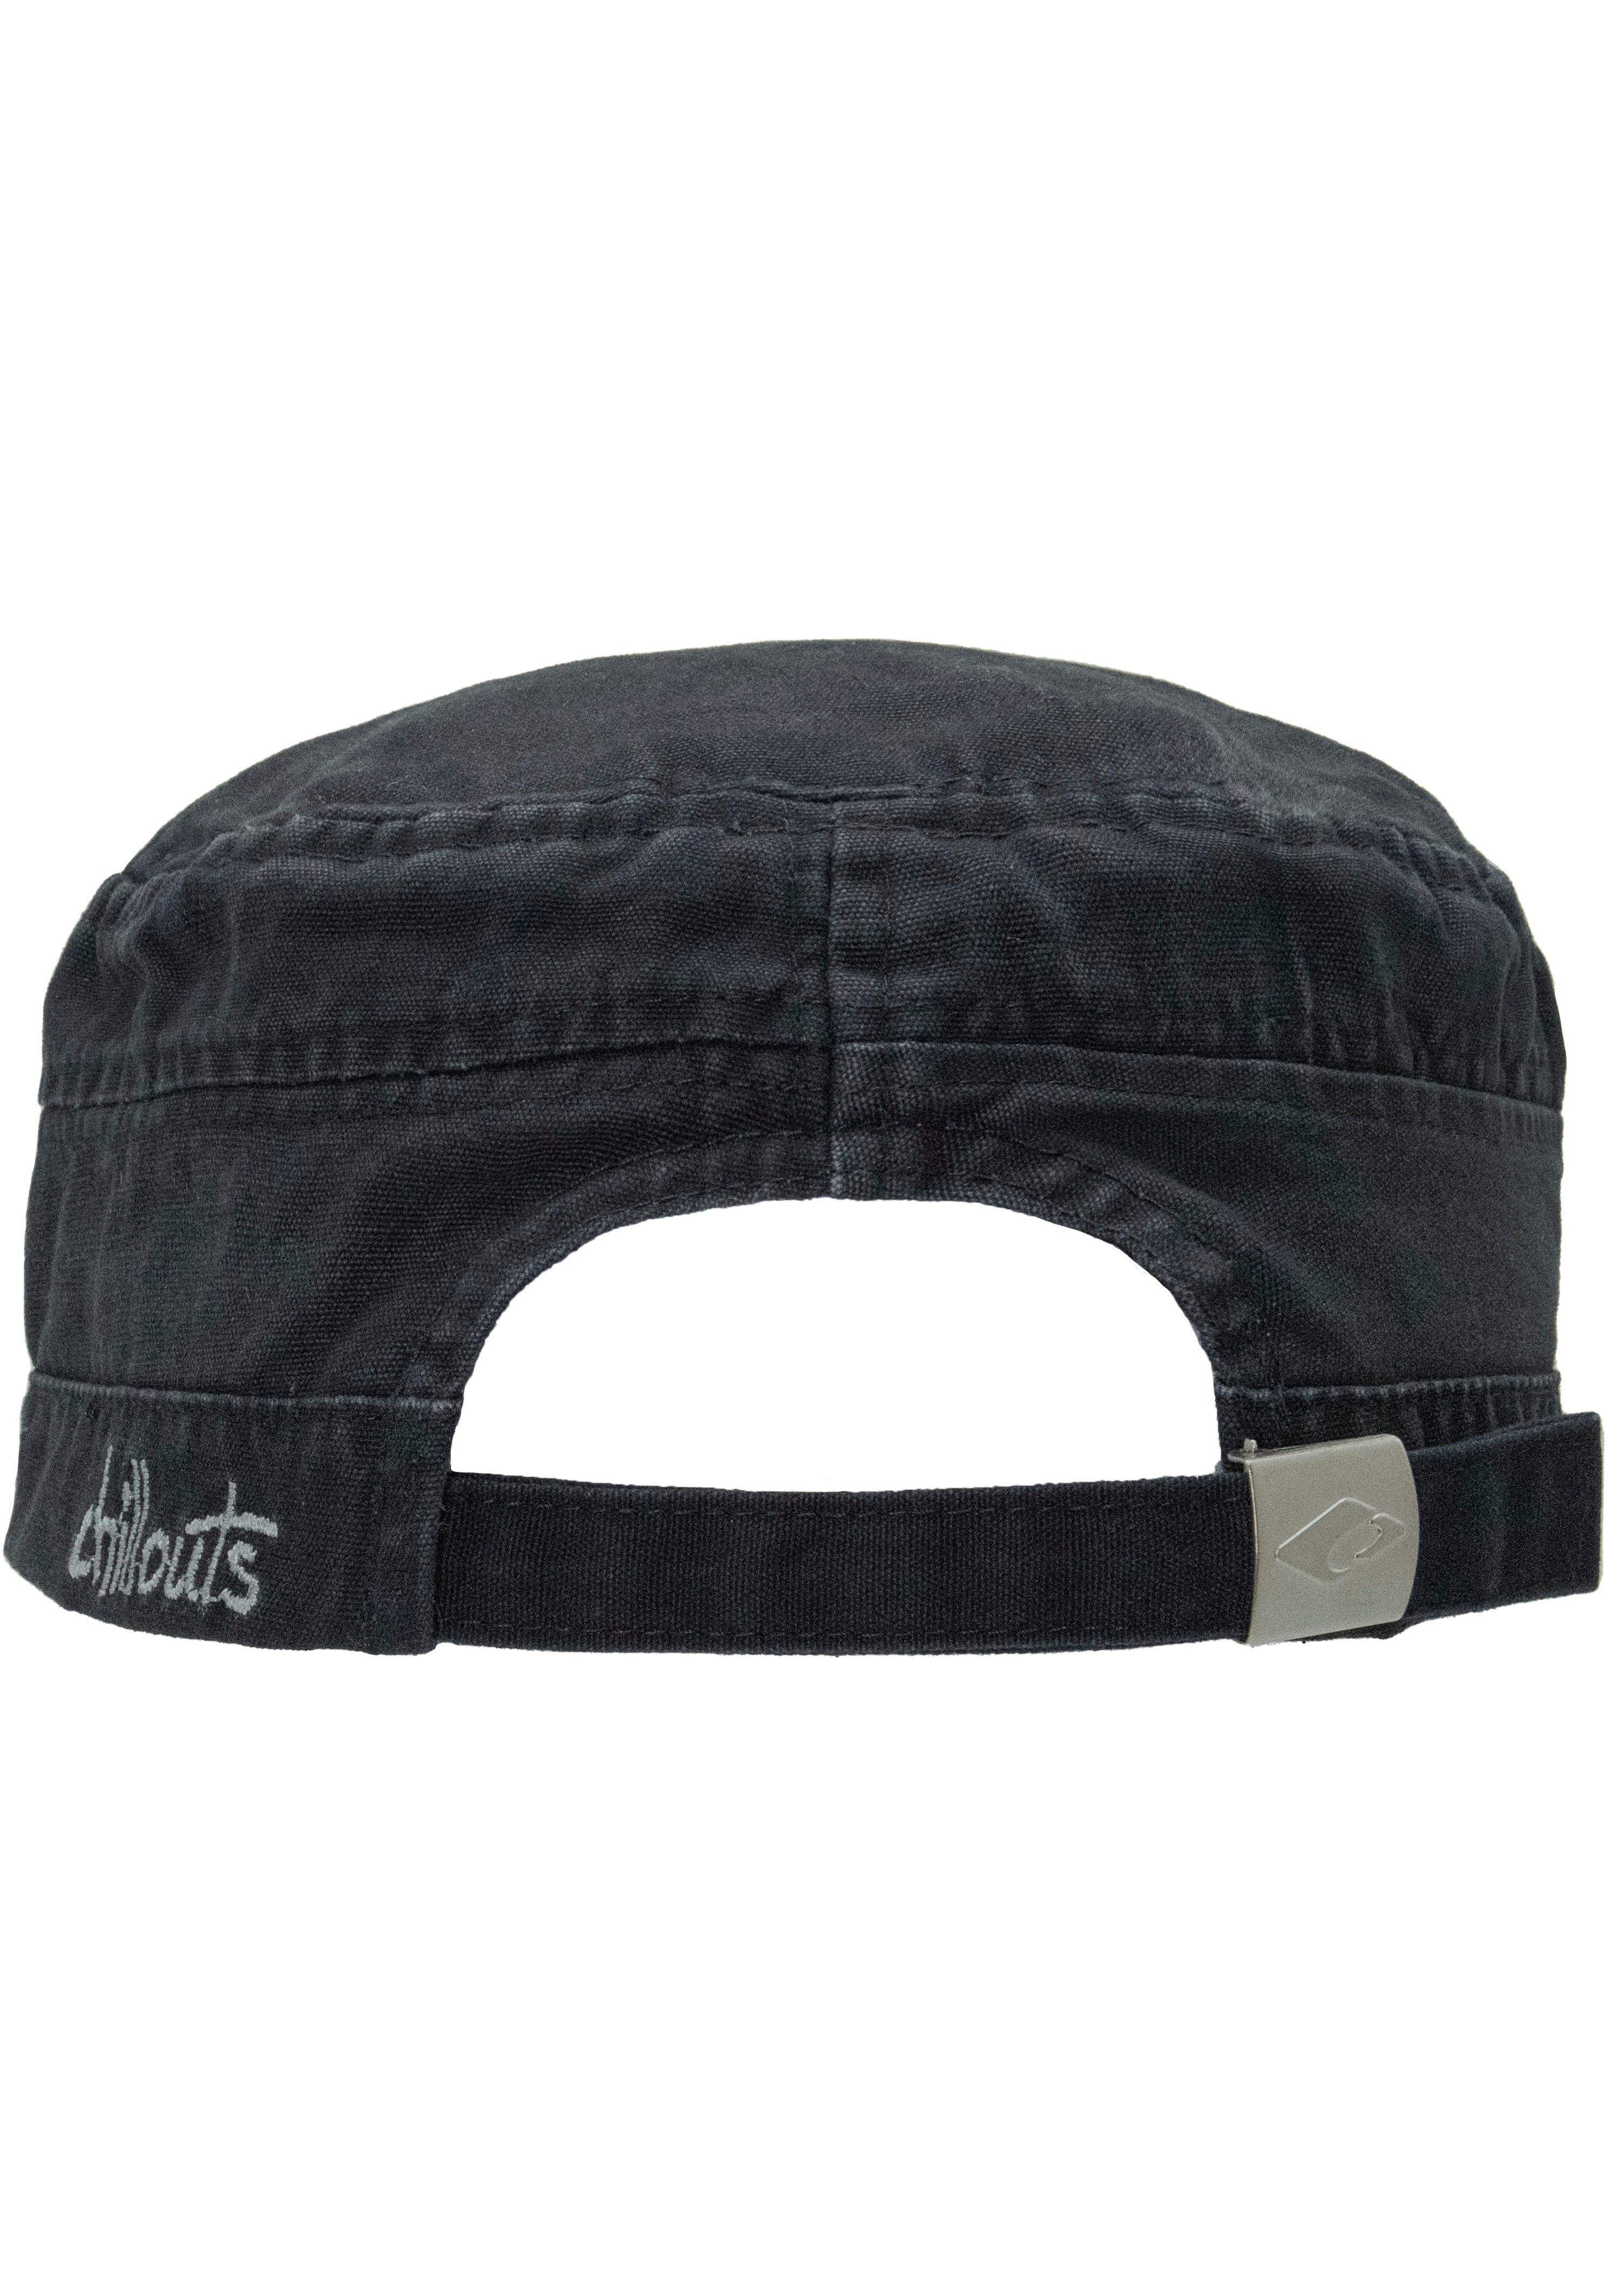 One chillouts navy Paso Hat Army Baumwolle, washed atmungsaktiv, aus Size reiner Cap El